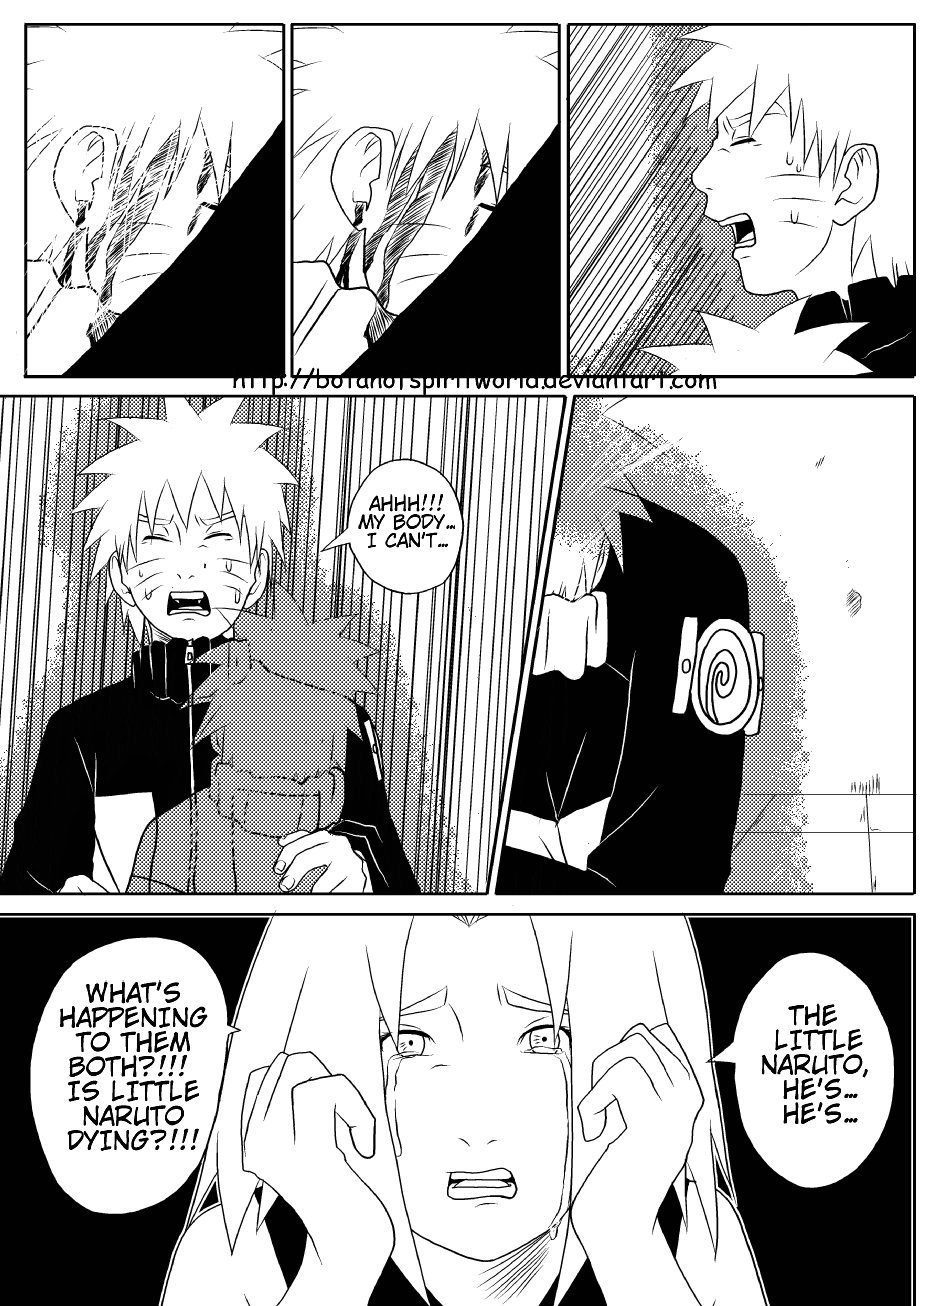 Uzumaki Blood - Chapter 2 - FantasyGirlForever - Naruto [Archive of Our Own]